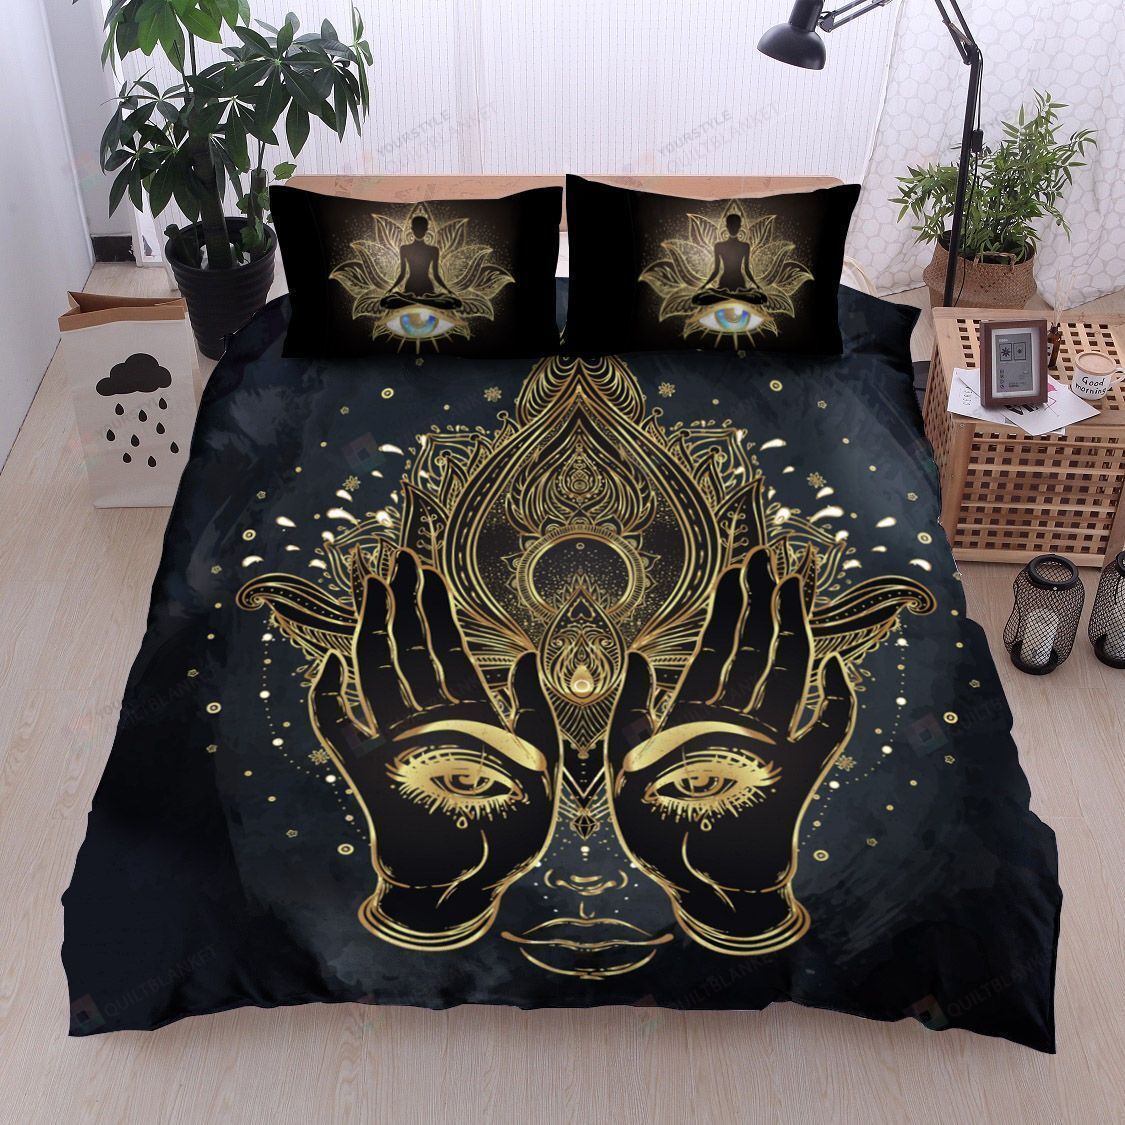 Buddha Cotton Bed Sheets Spread Comforter Duvet Cover Bedding Sets